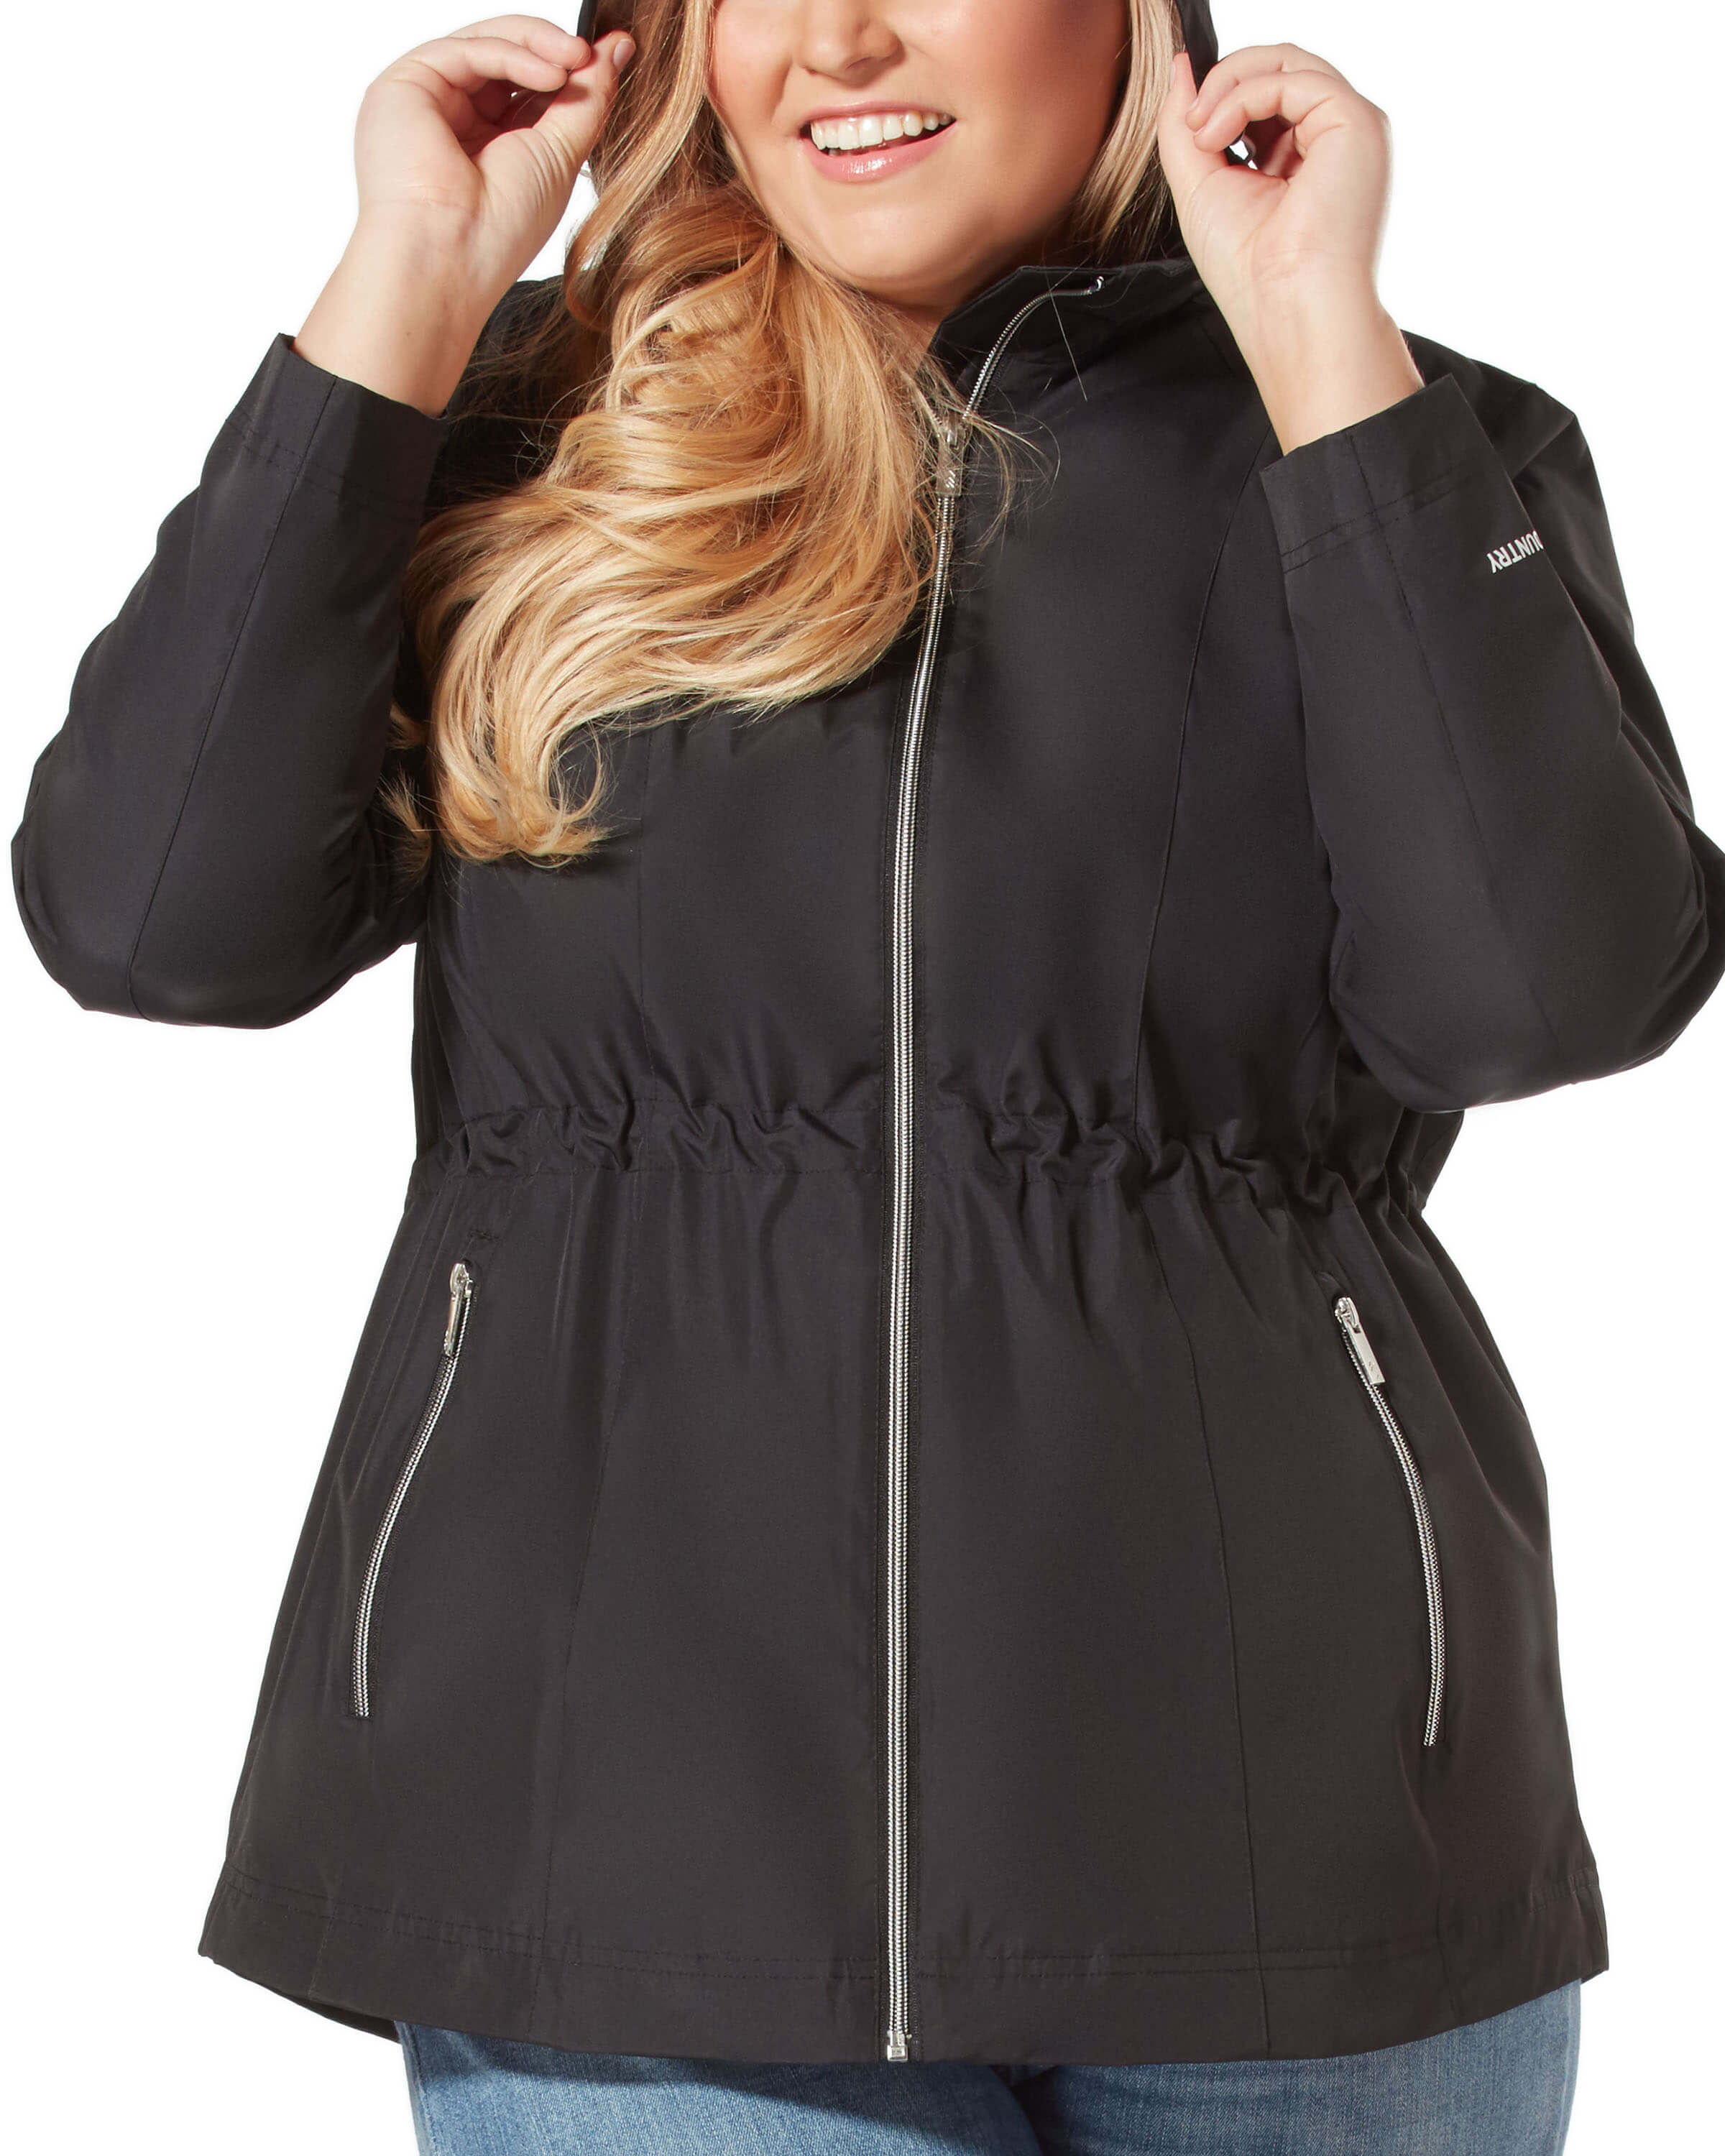 tilbede ler rotation Women's Plus Size New Day Radiance Anorak Rain Jacket – Free Country